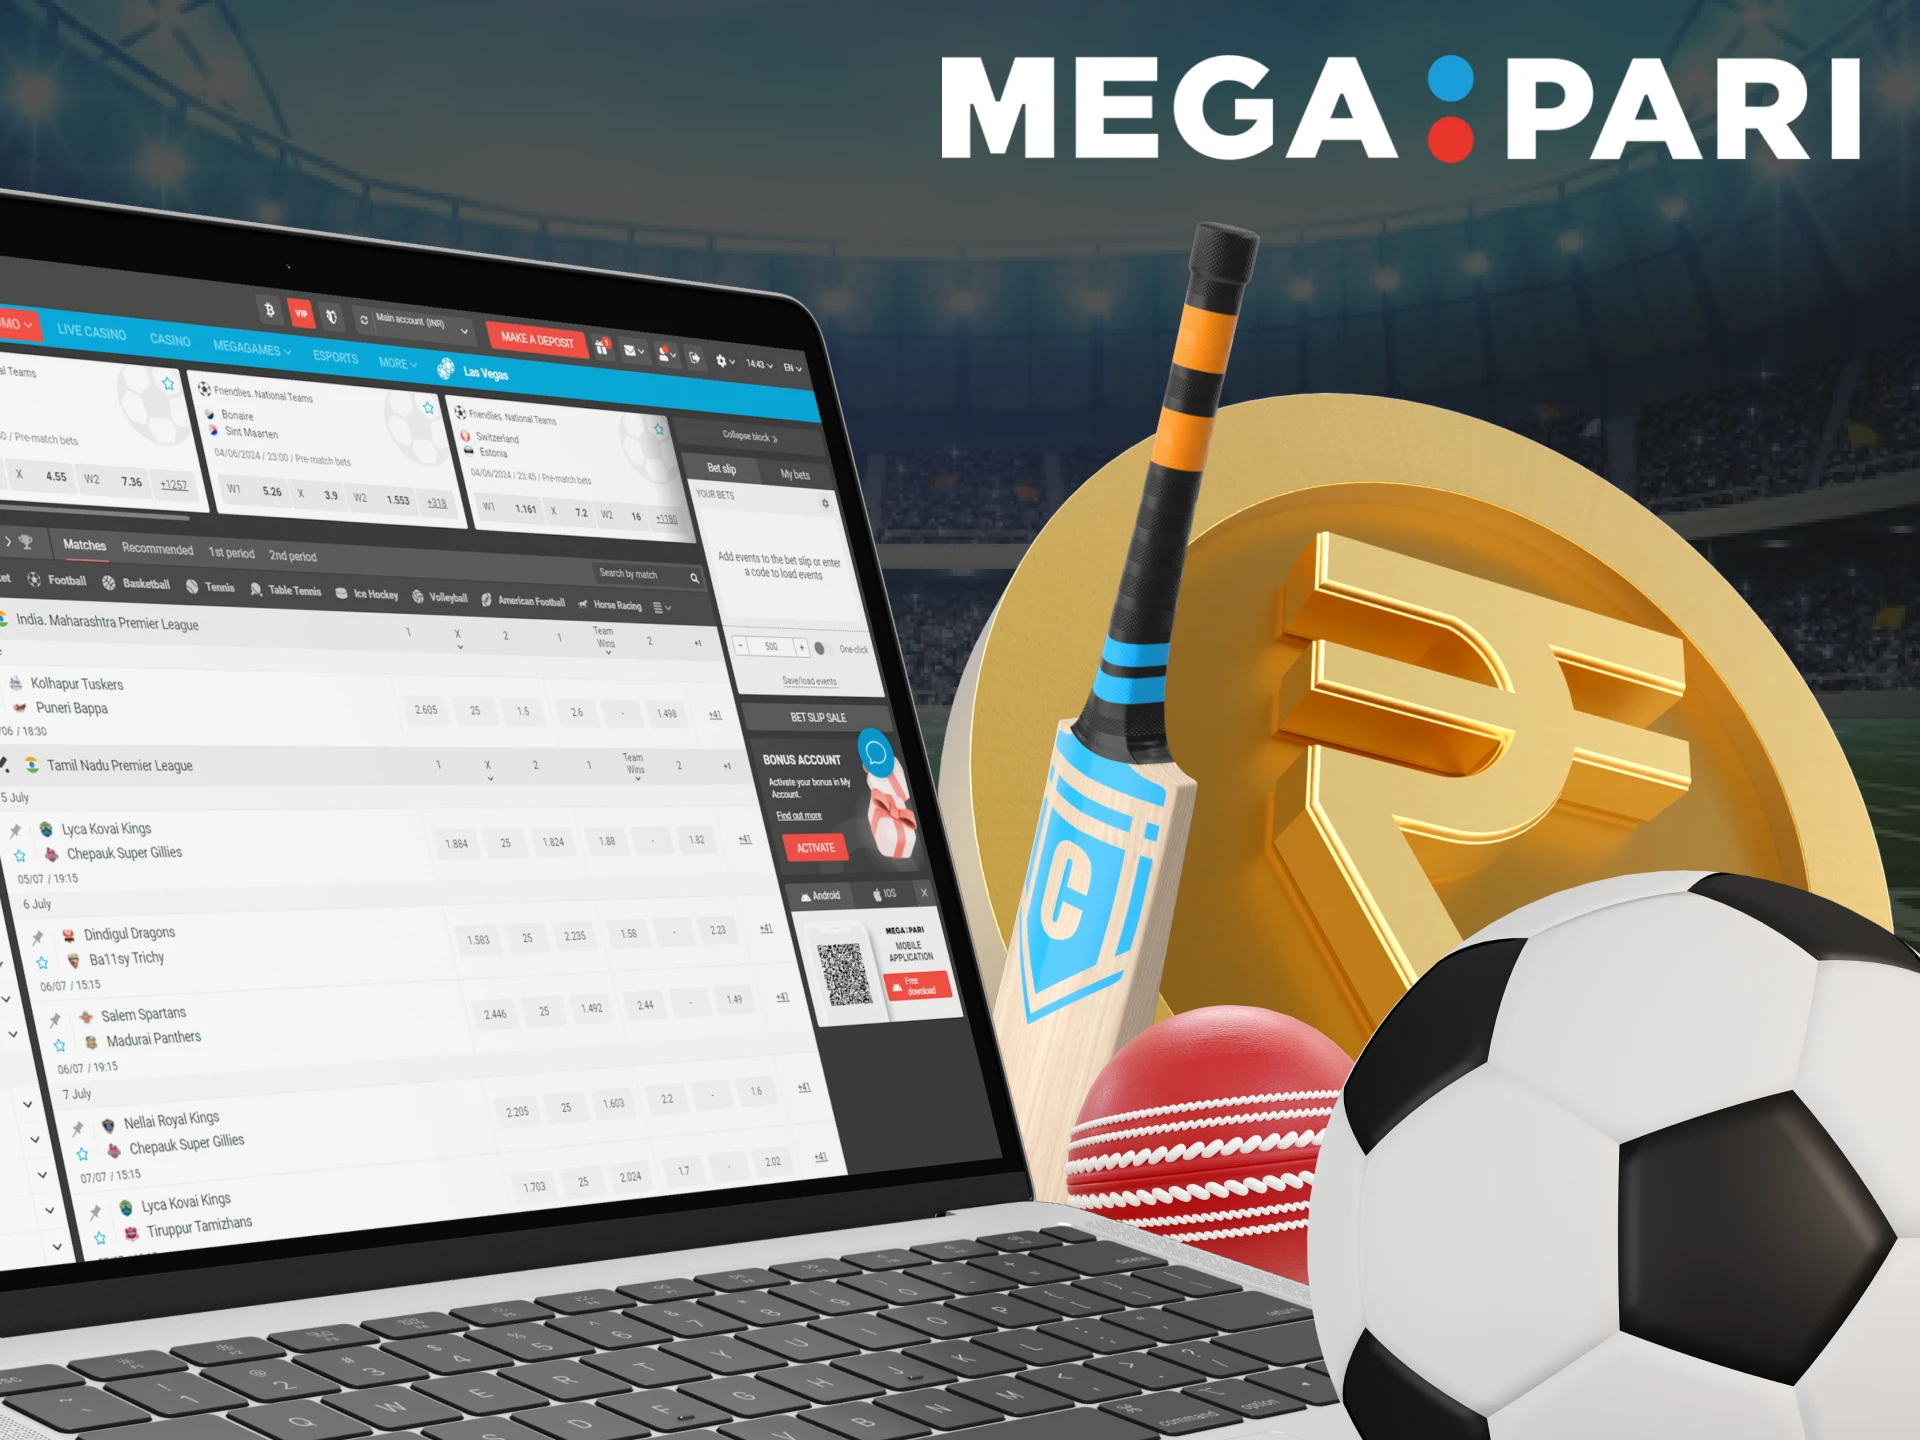 After registering and making a deposit with Megapari, you can start betting on sports.